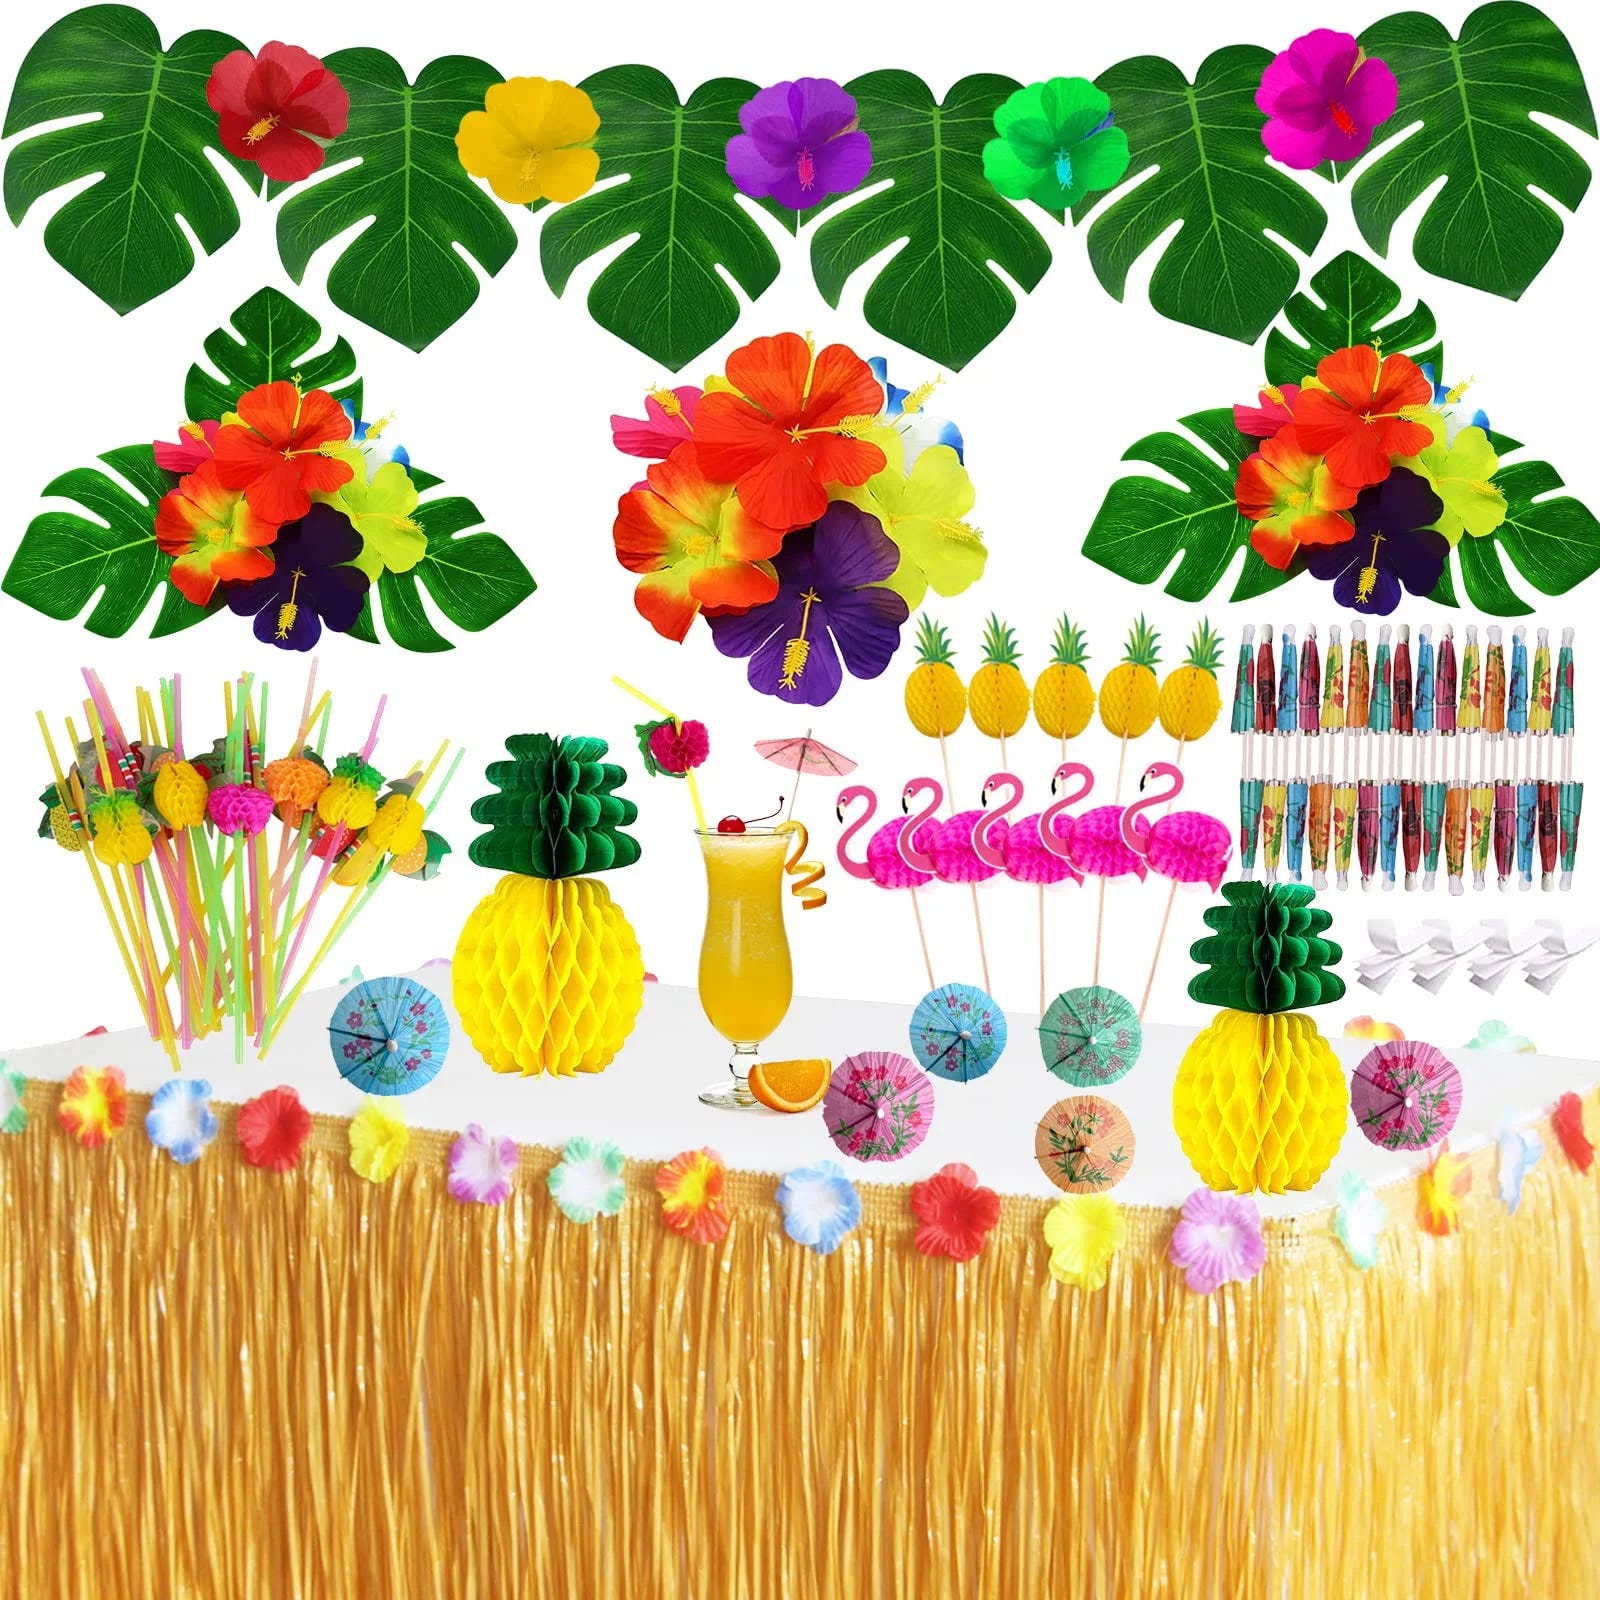 Tropical Luau Party Decorations: Hawaiian Beach Theme Party Supplies and Favors | Image